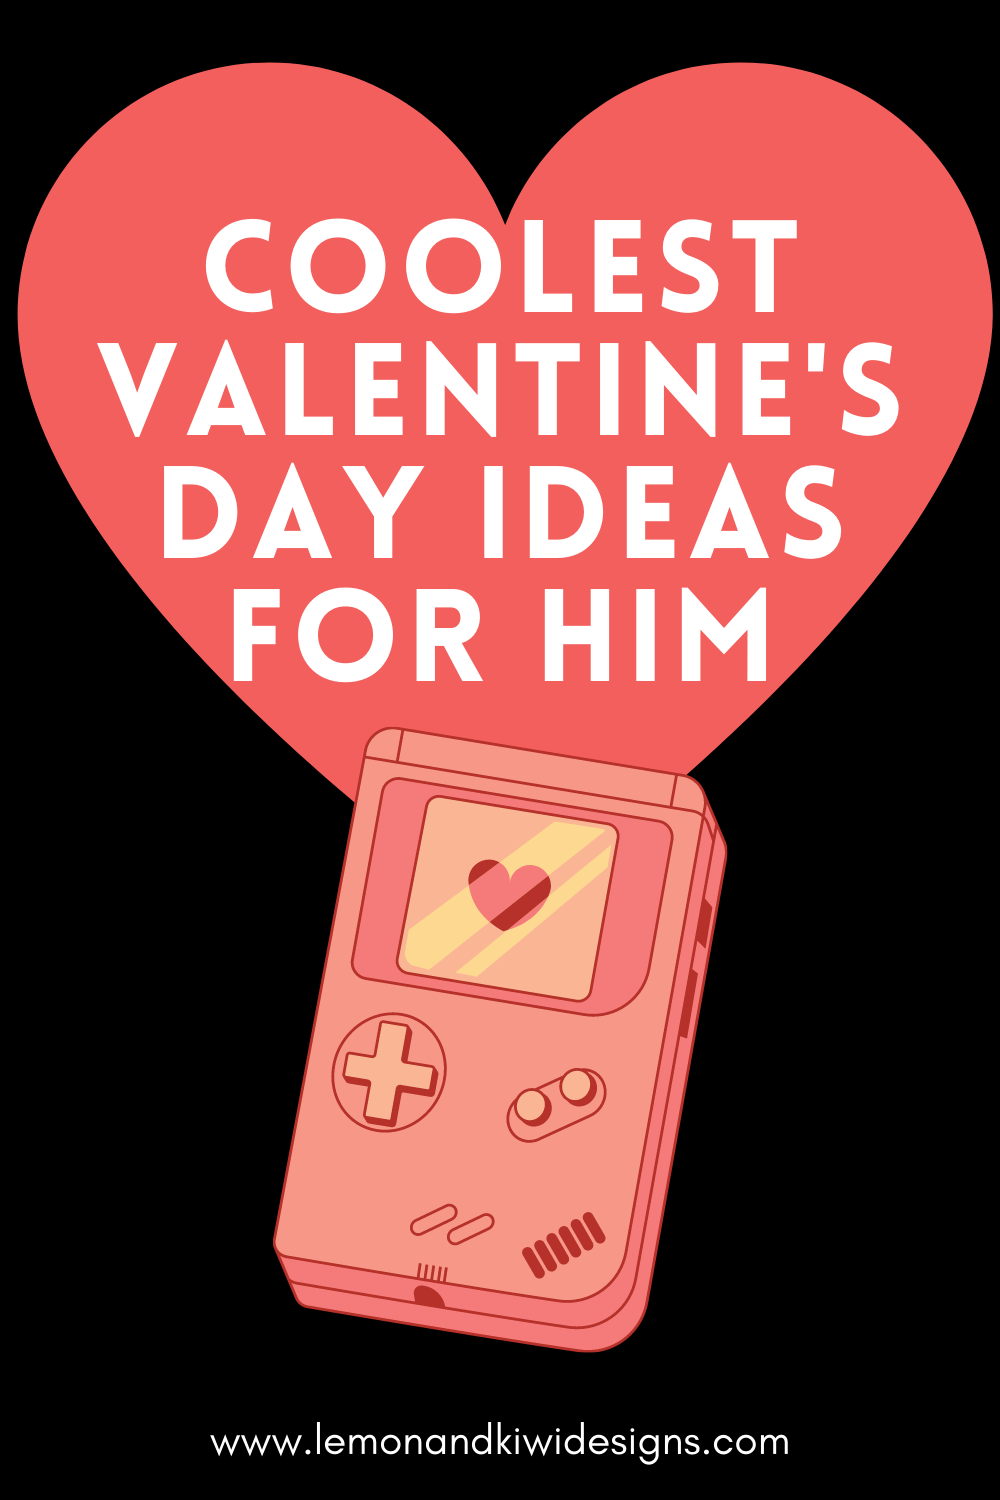 The Coolest Valentine’s Day Ideas For Him in 2022